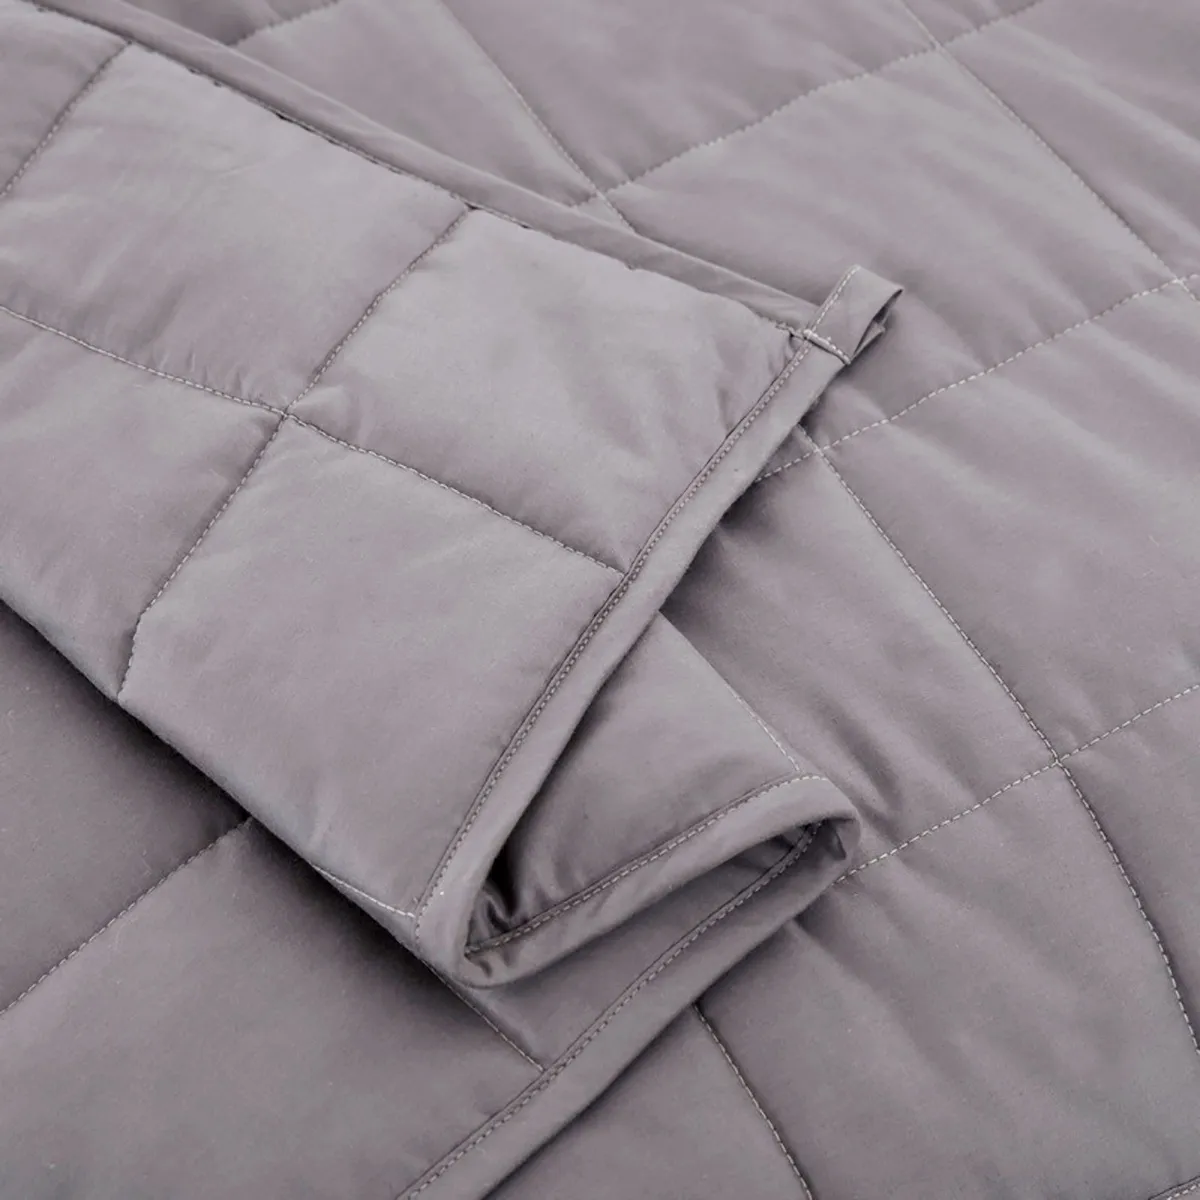 Weighted for Adult Blankets Decompression Sleep Aid Pressure Sleeping Heavy Throw Blanket Bed 201222